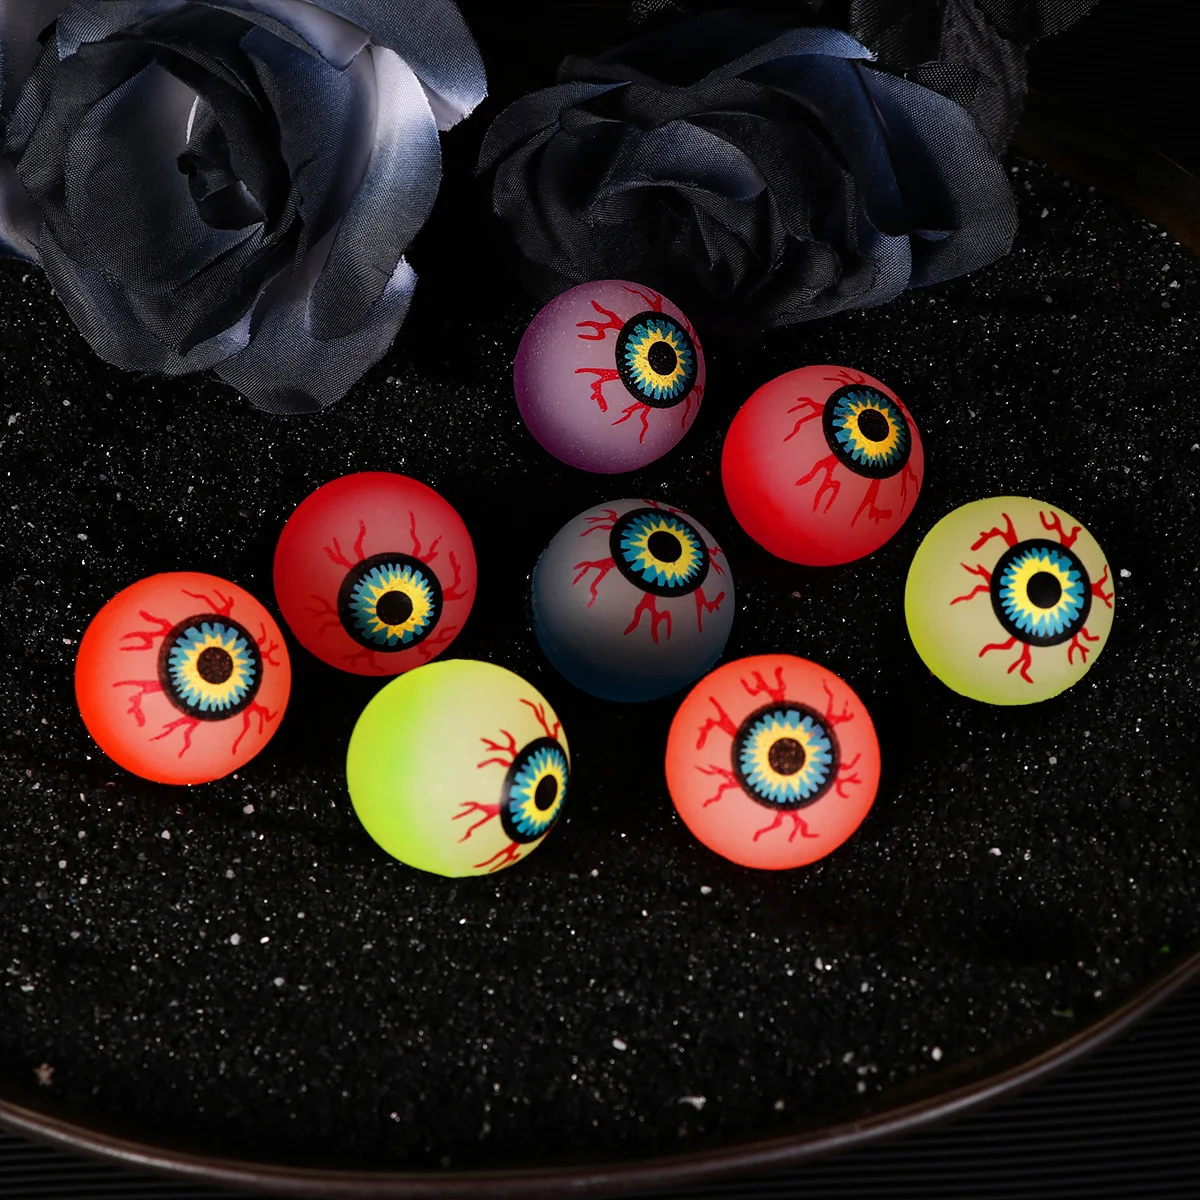 

TOYMYTOY 10pcs 32mm Glow in the Dark Halloween Bouncy Balls Scary Eye Balls Halloween Party Supplies (Random Color)